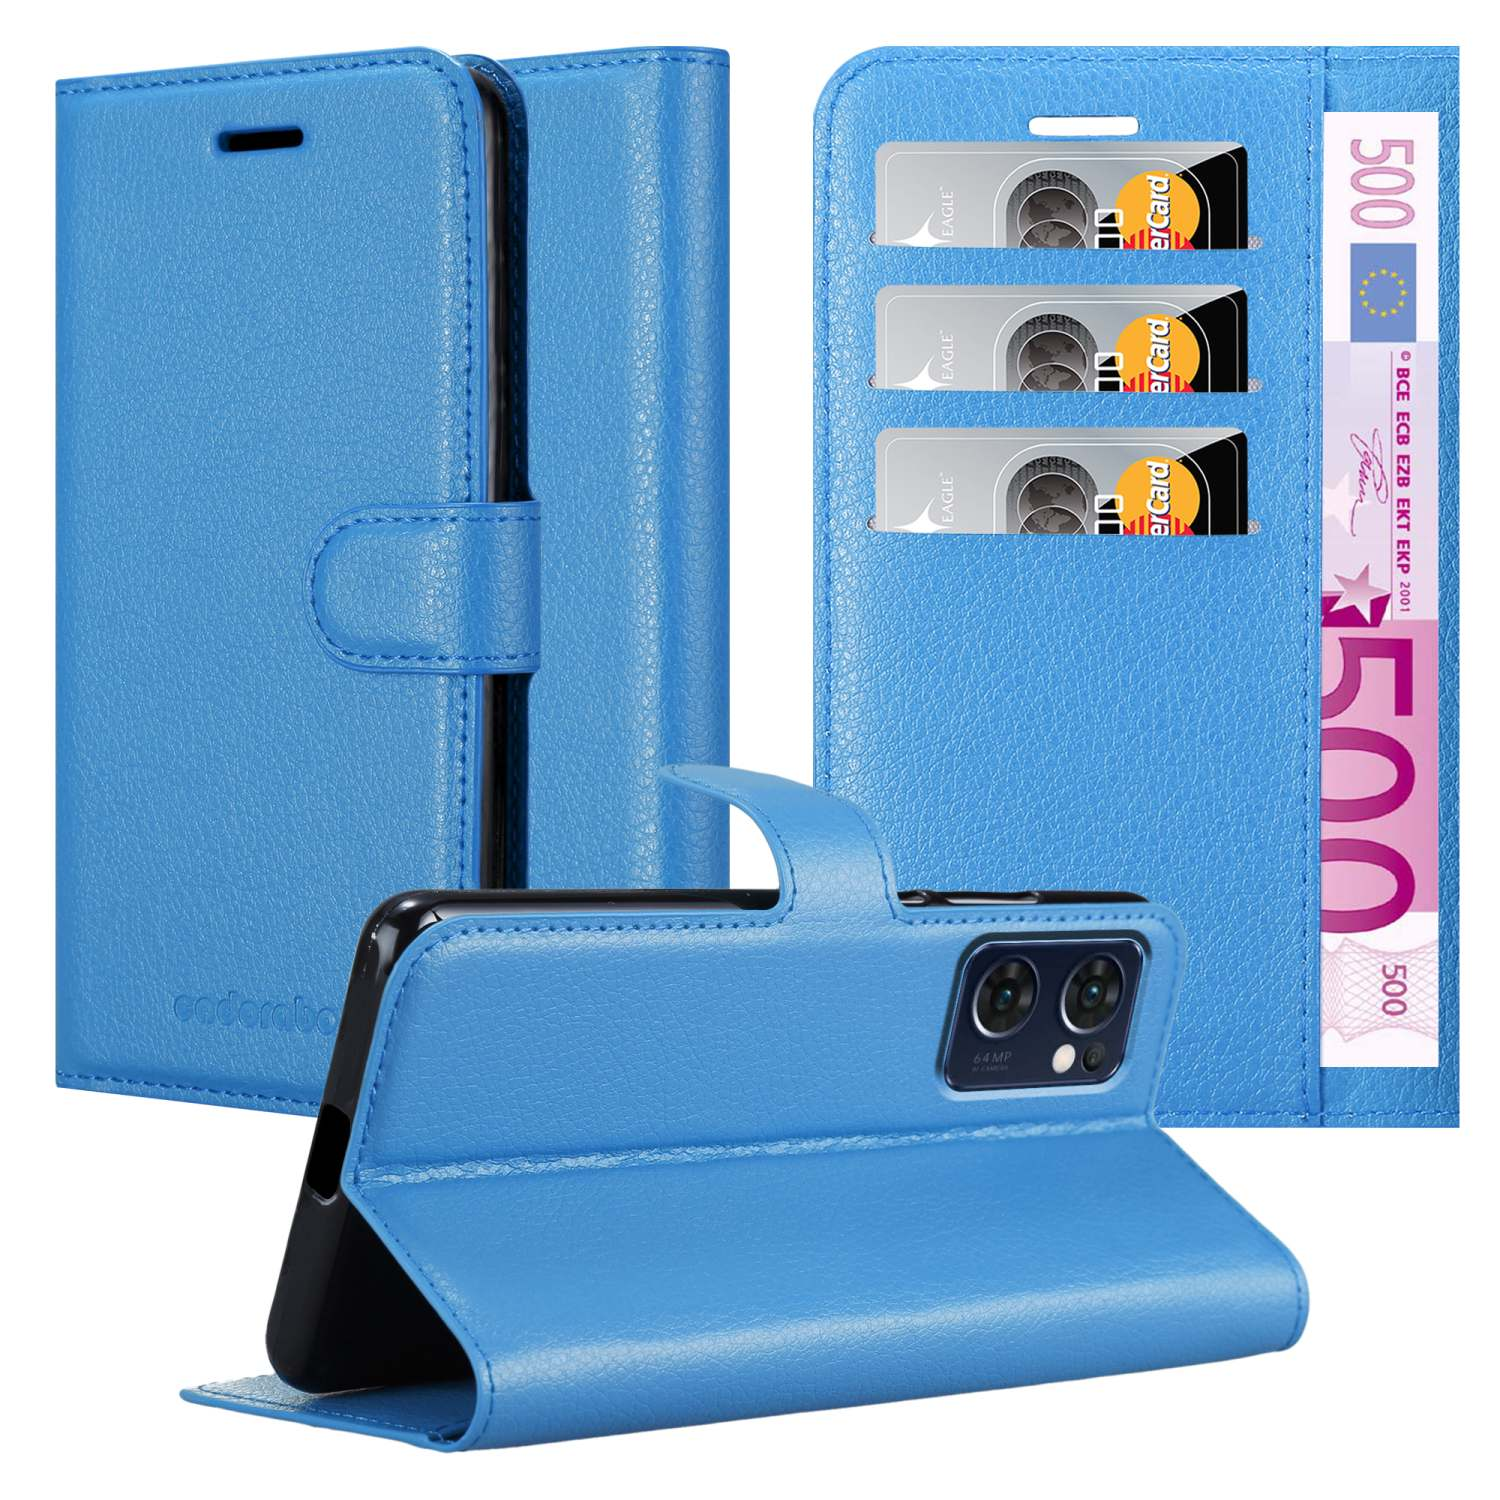 CADORABO Book 5G, BLAU Reno7 Bookcover, Standfunktion, LITE X5 PASTELL Oppo, / Hülle FIND